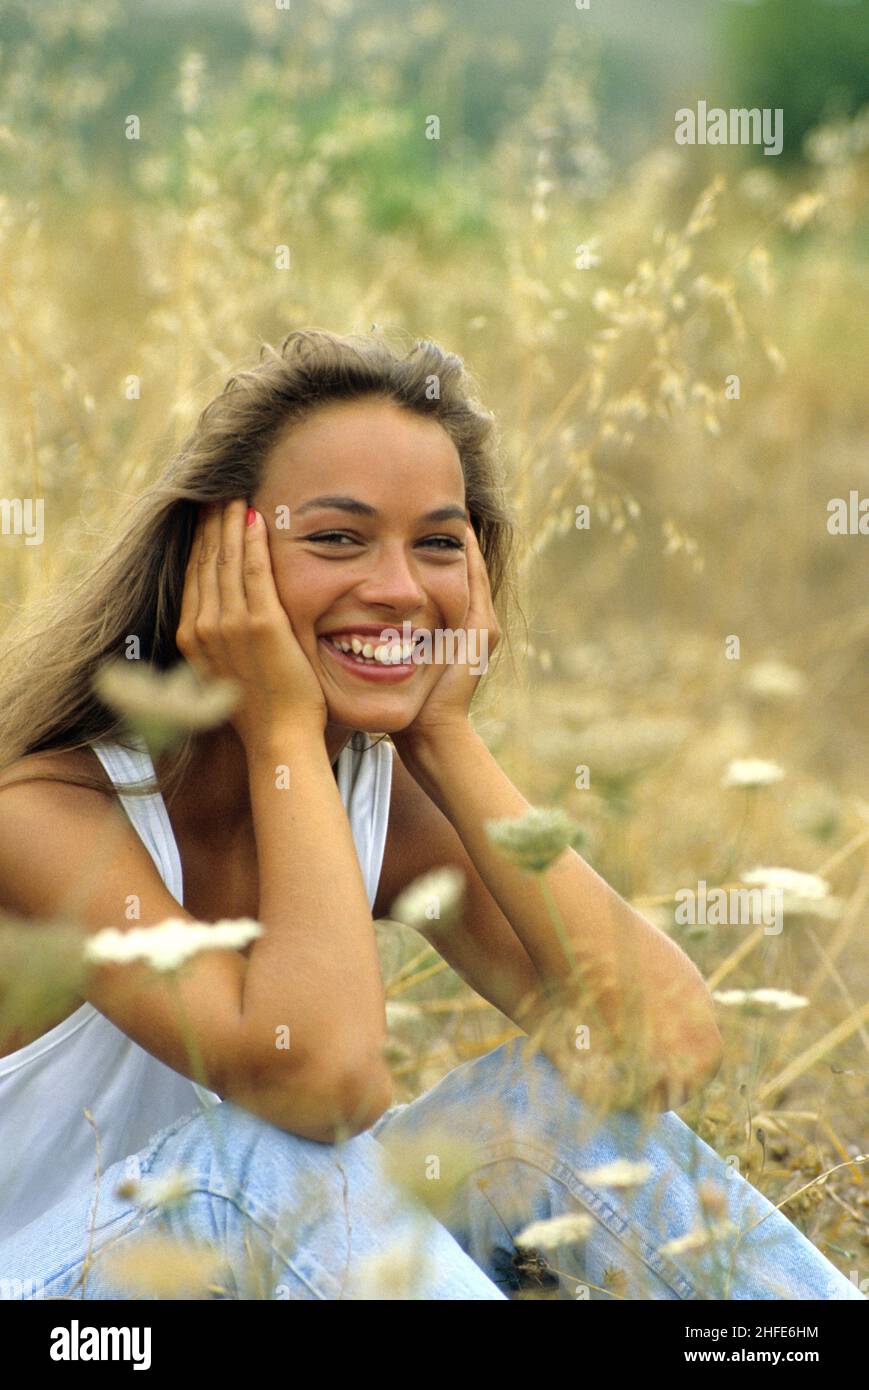 pretty brown hair young girl very expressive smiling laughing front the camera close up portrait yellow herbs background Stock Photo